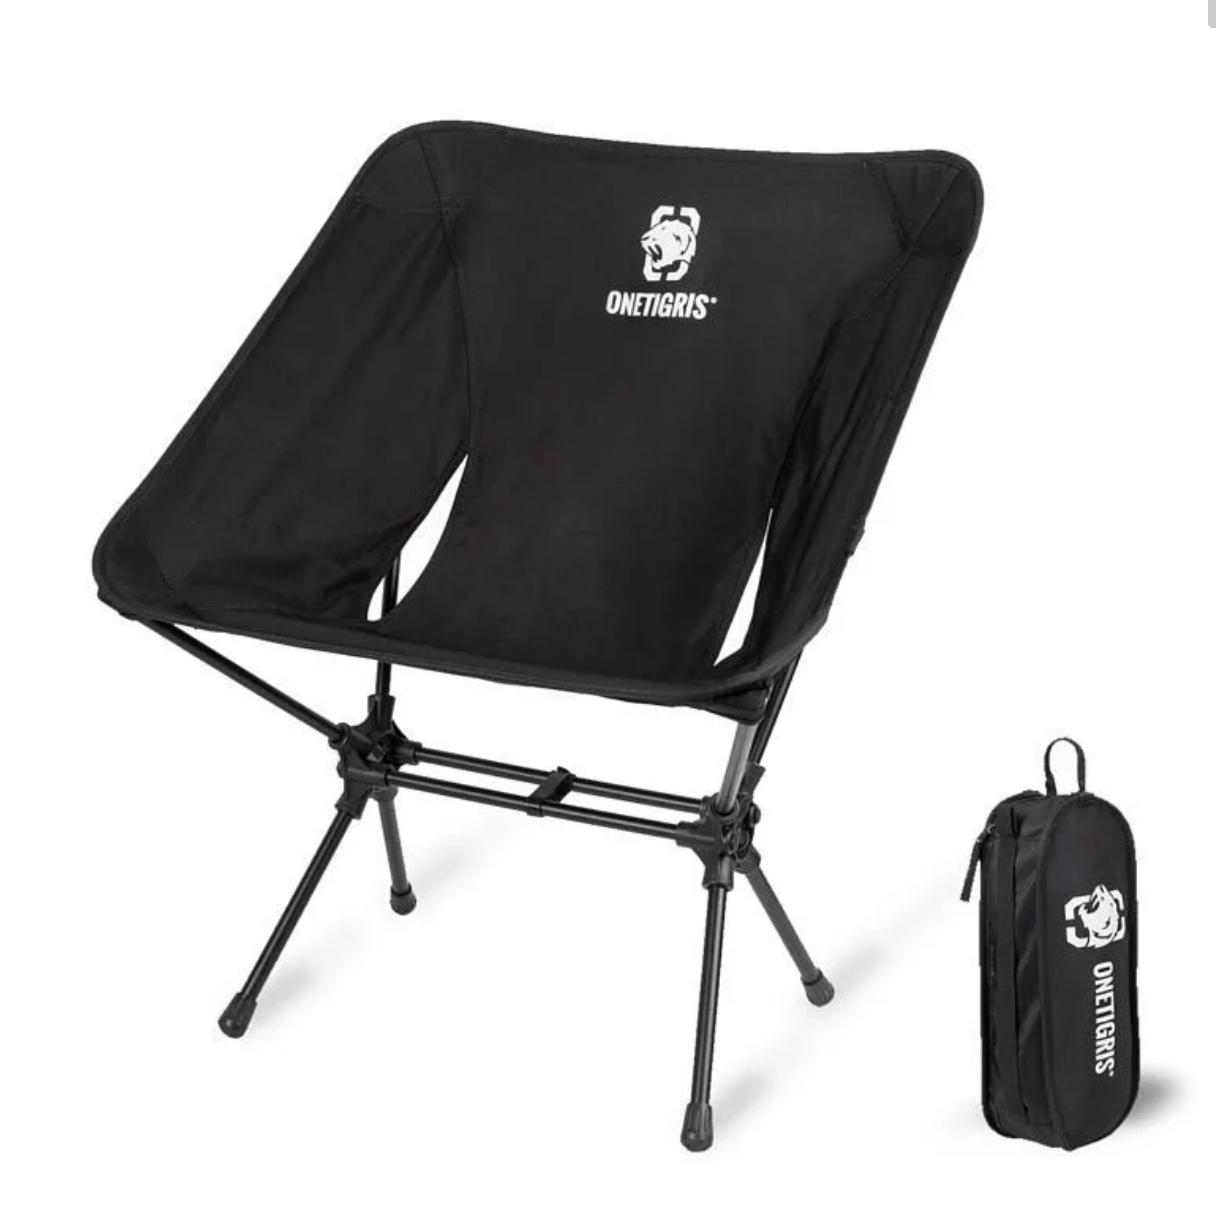 Onetigris, Portable Camping Chair 02